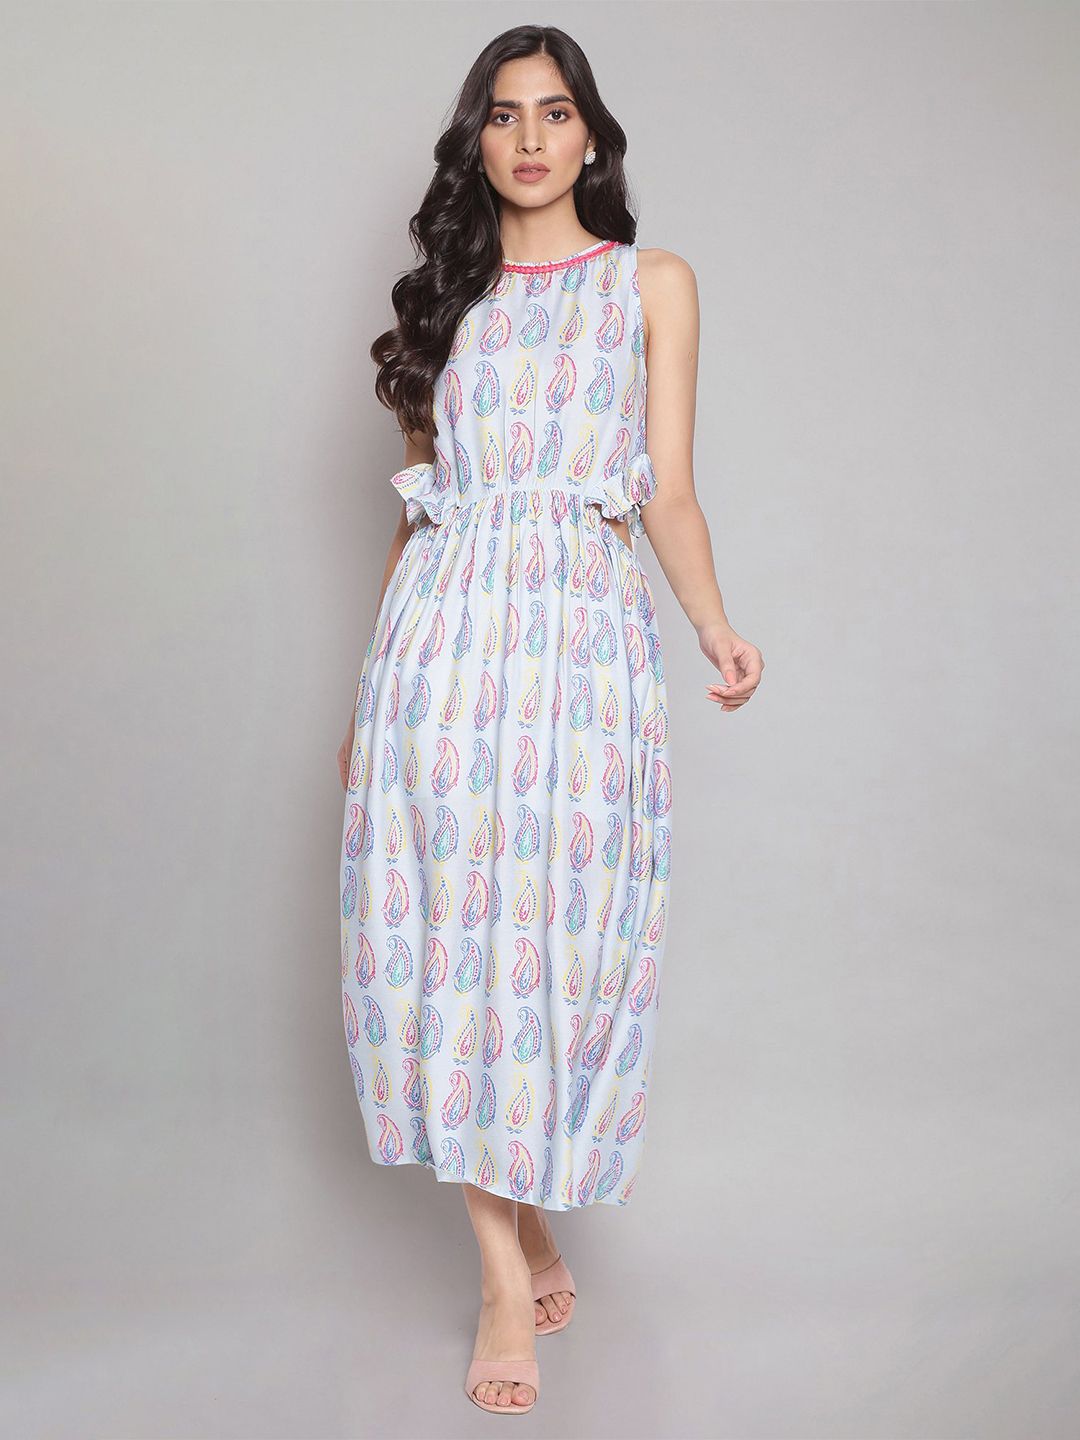 W Blue Floral Omplalodes printed dress with cut-outs waist and gathers. Price in India